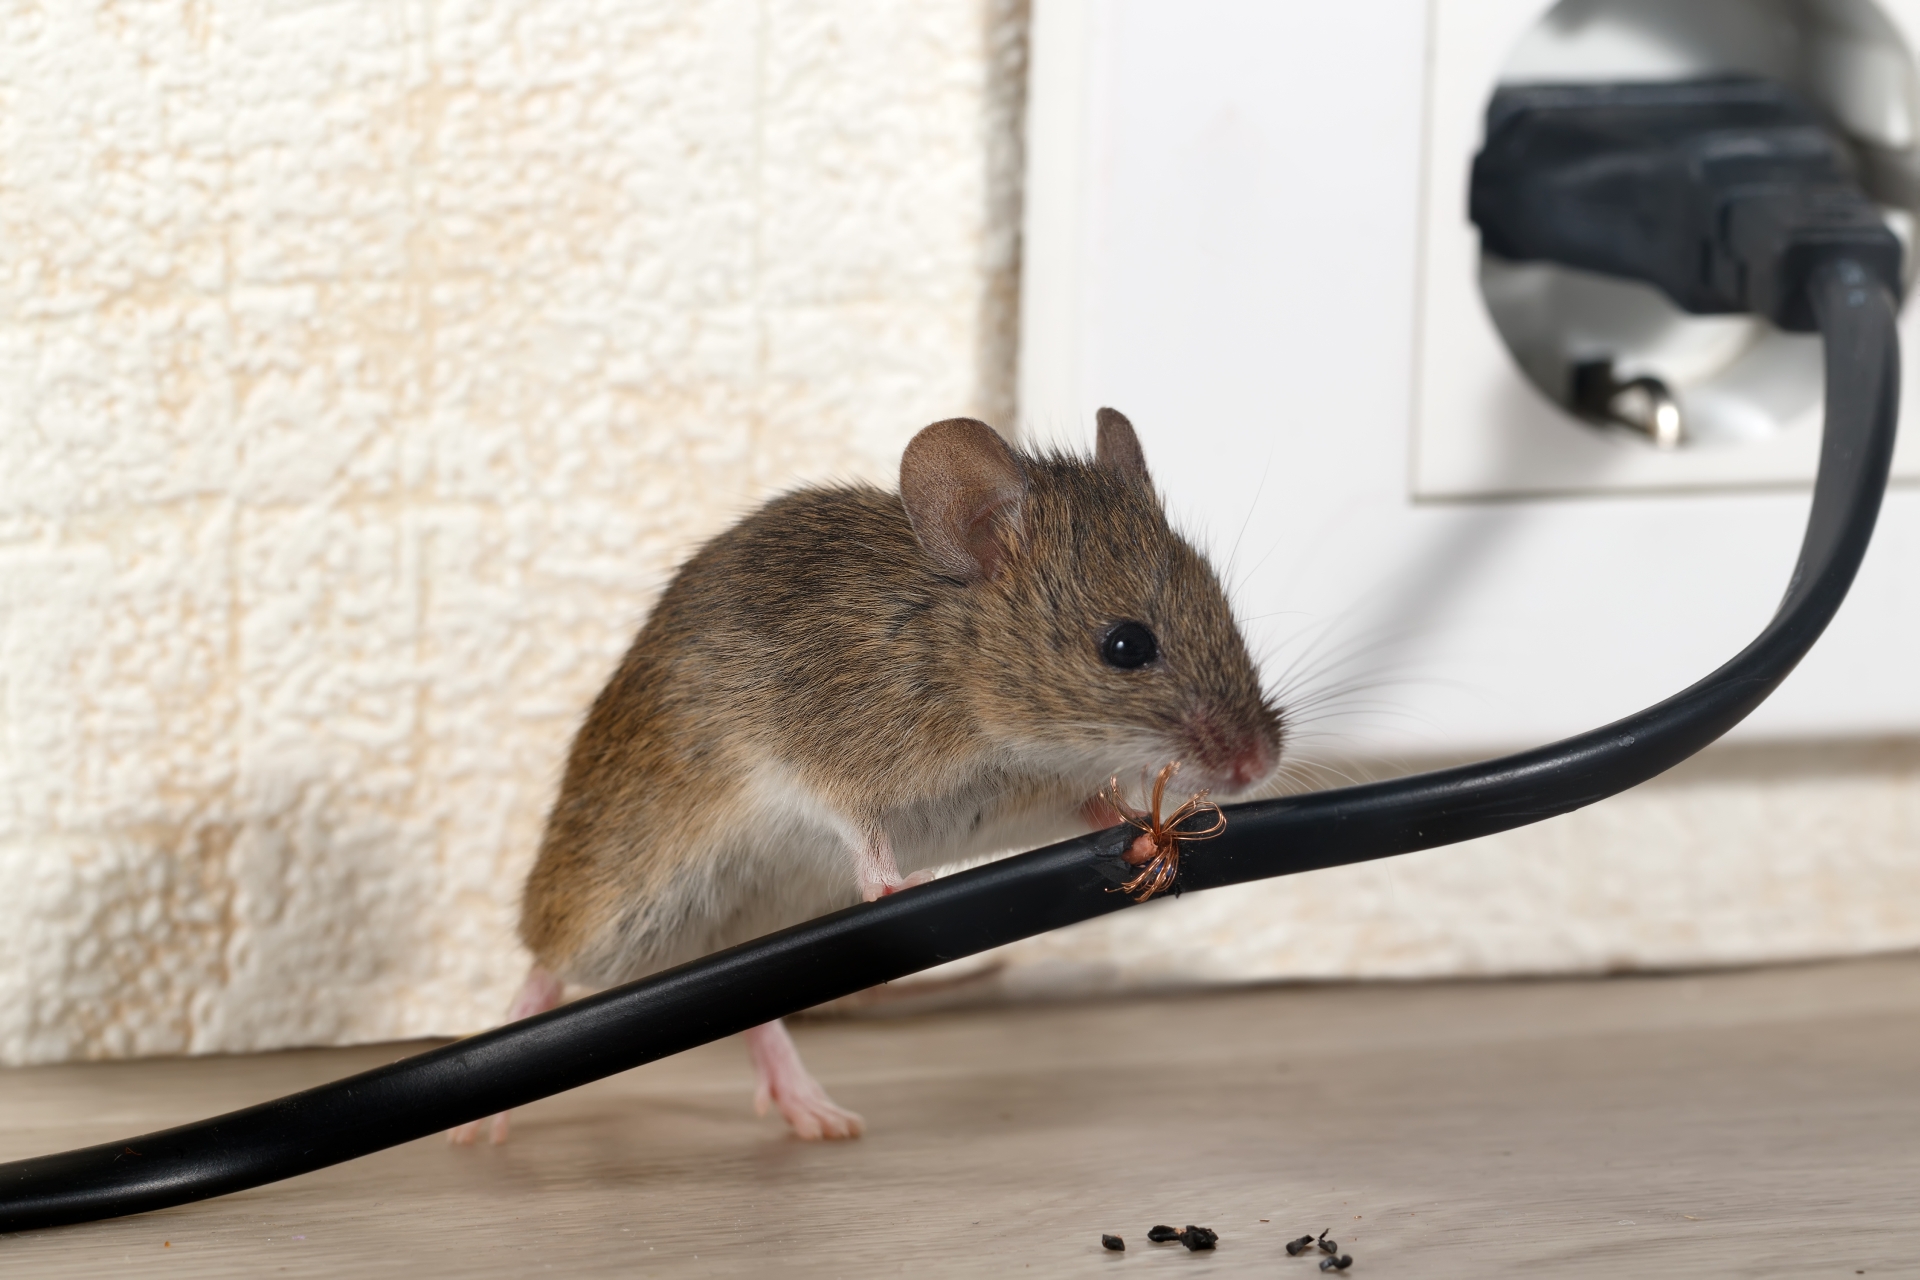 Mice Infestation, Pest Control in Holloway, N7 . Call Now 020 8166 9746